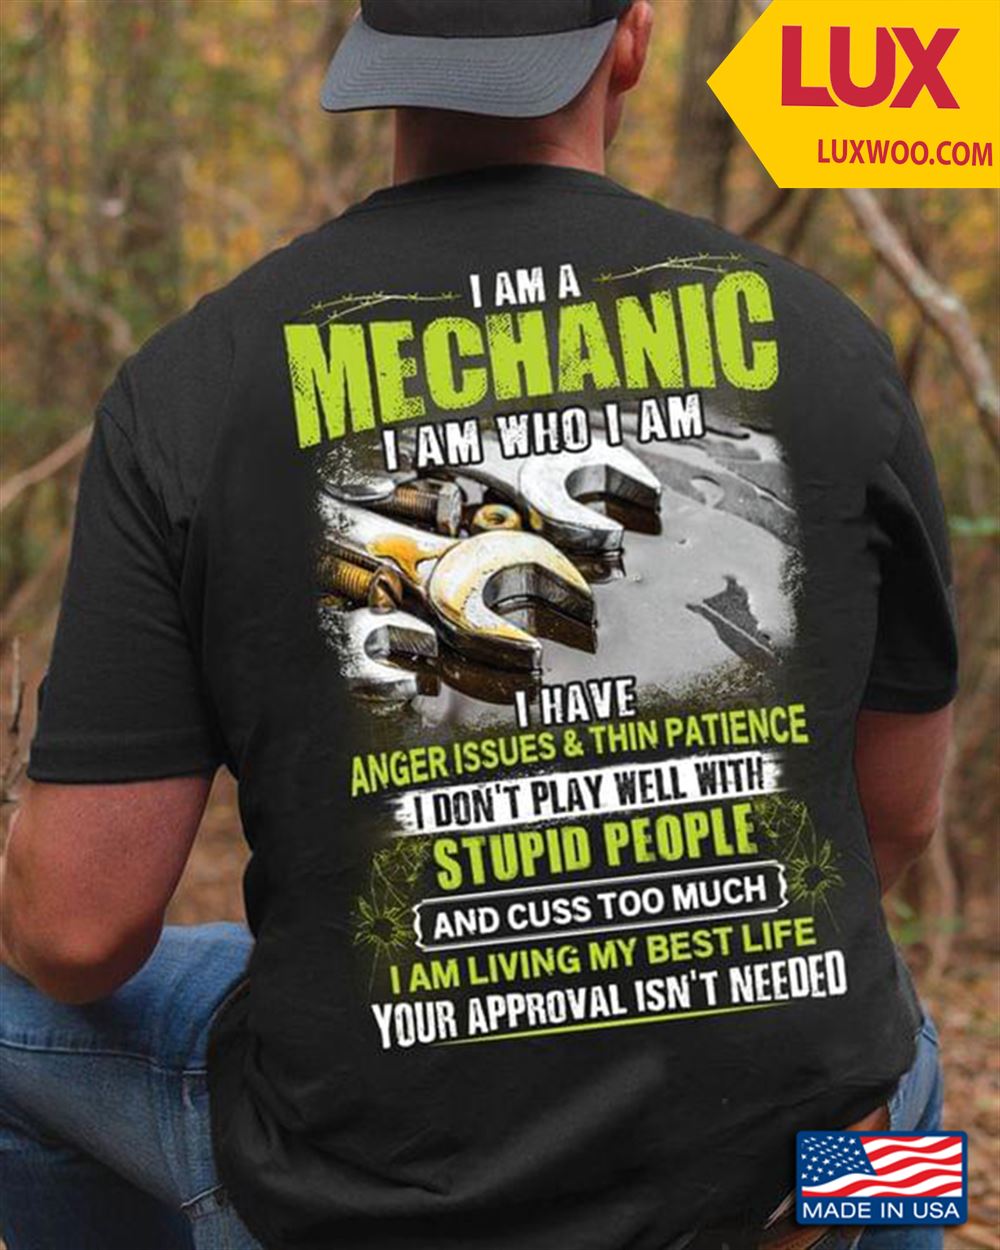 I Am A Mechanic I Am Who I Am I Have Anger Issues And Thin Patience I Dont Play Well With Tshirt Size Up To 5xl